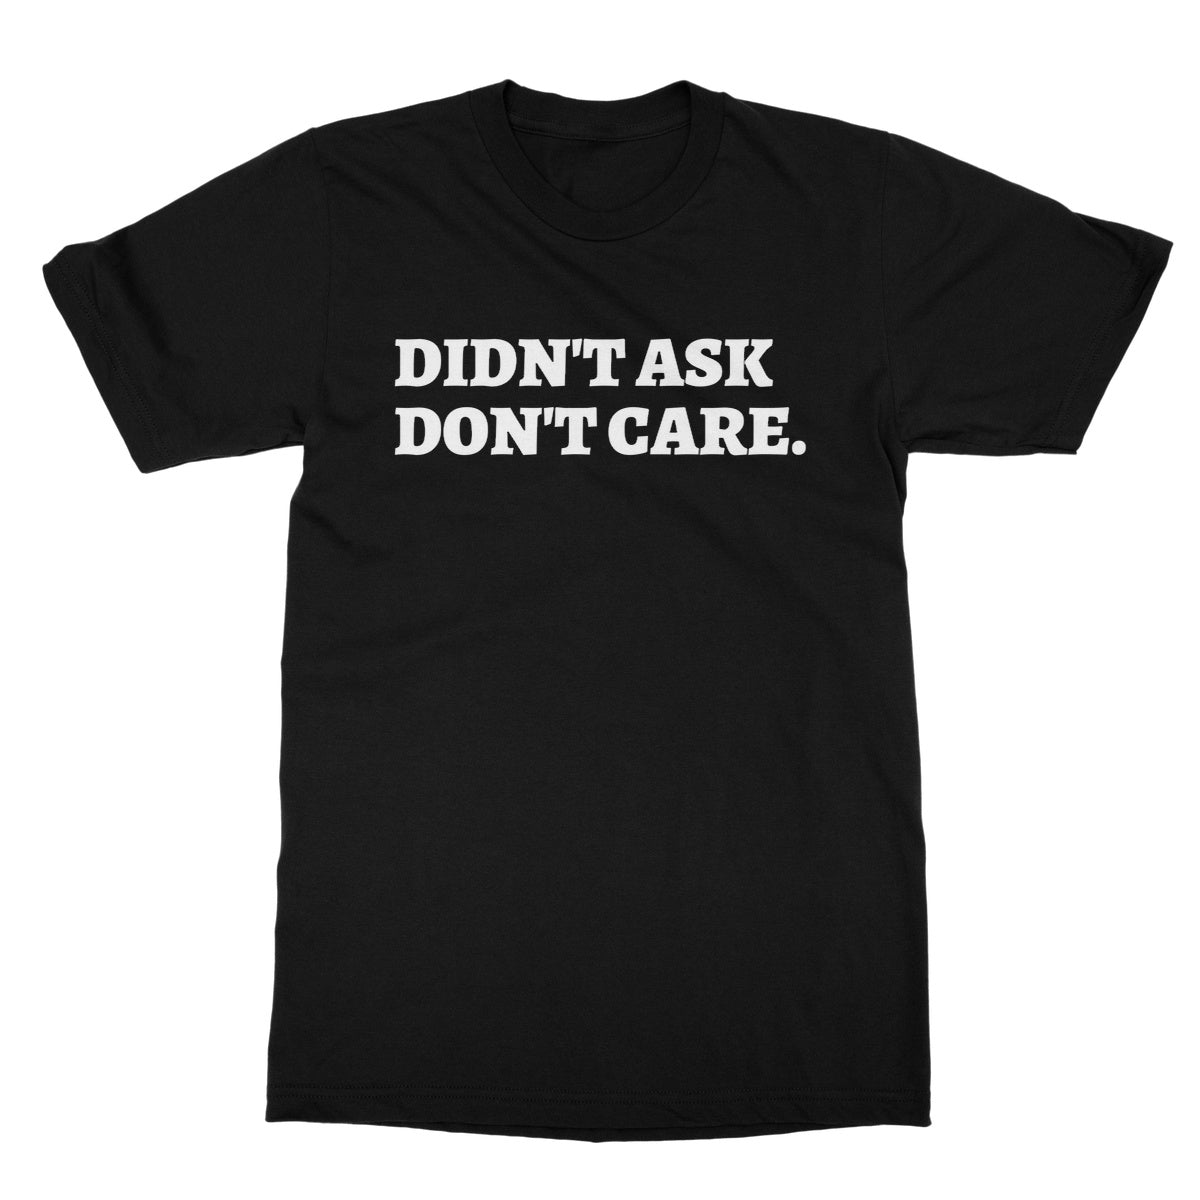 didn't ask don't care t shirt black